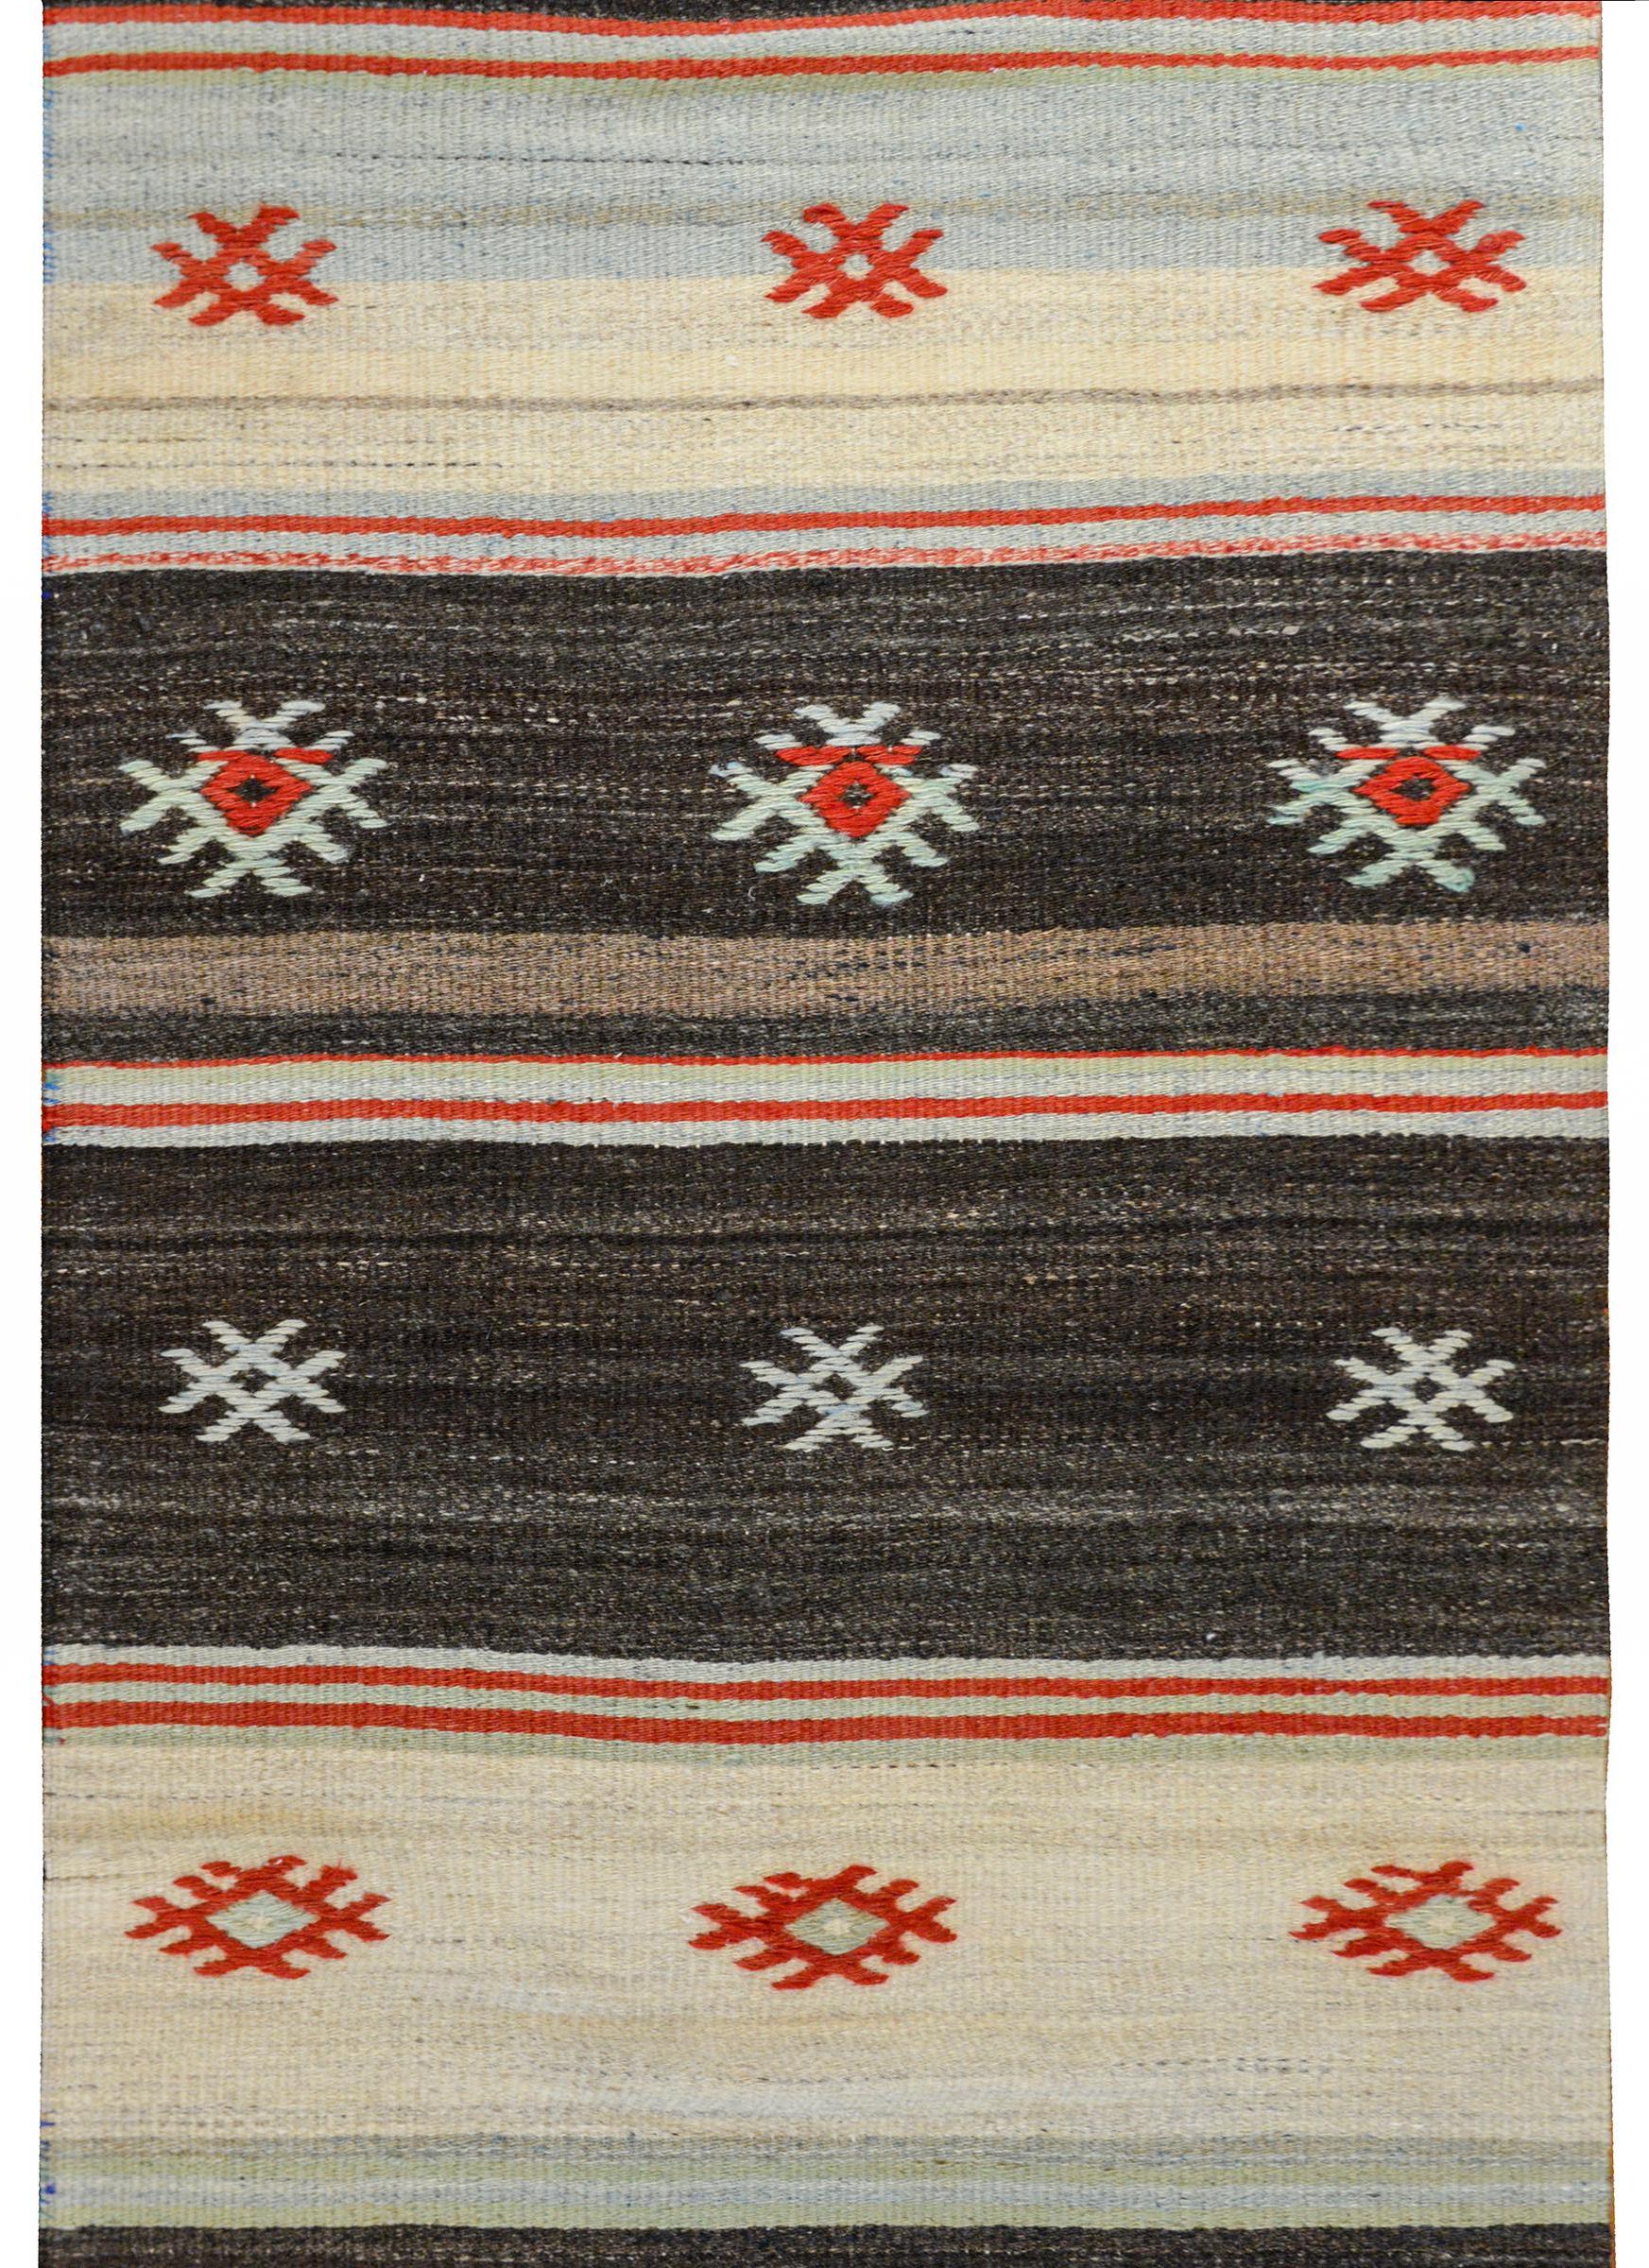 A vintage Turkish Konya Kilim runner with a wonderful black, white, crimson, pale indigo, pale green, and cream striped pattern with embroidered stylized flowers.